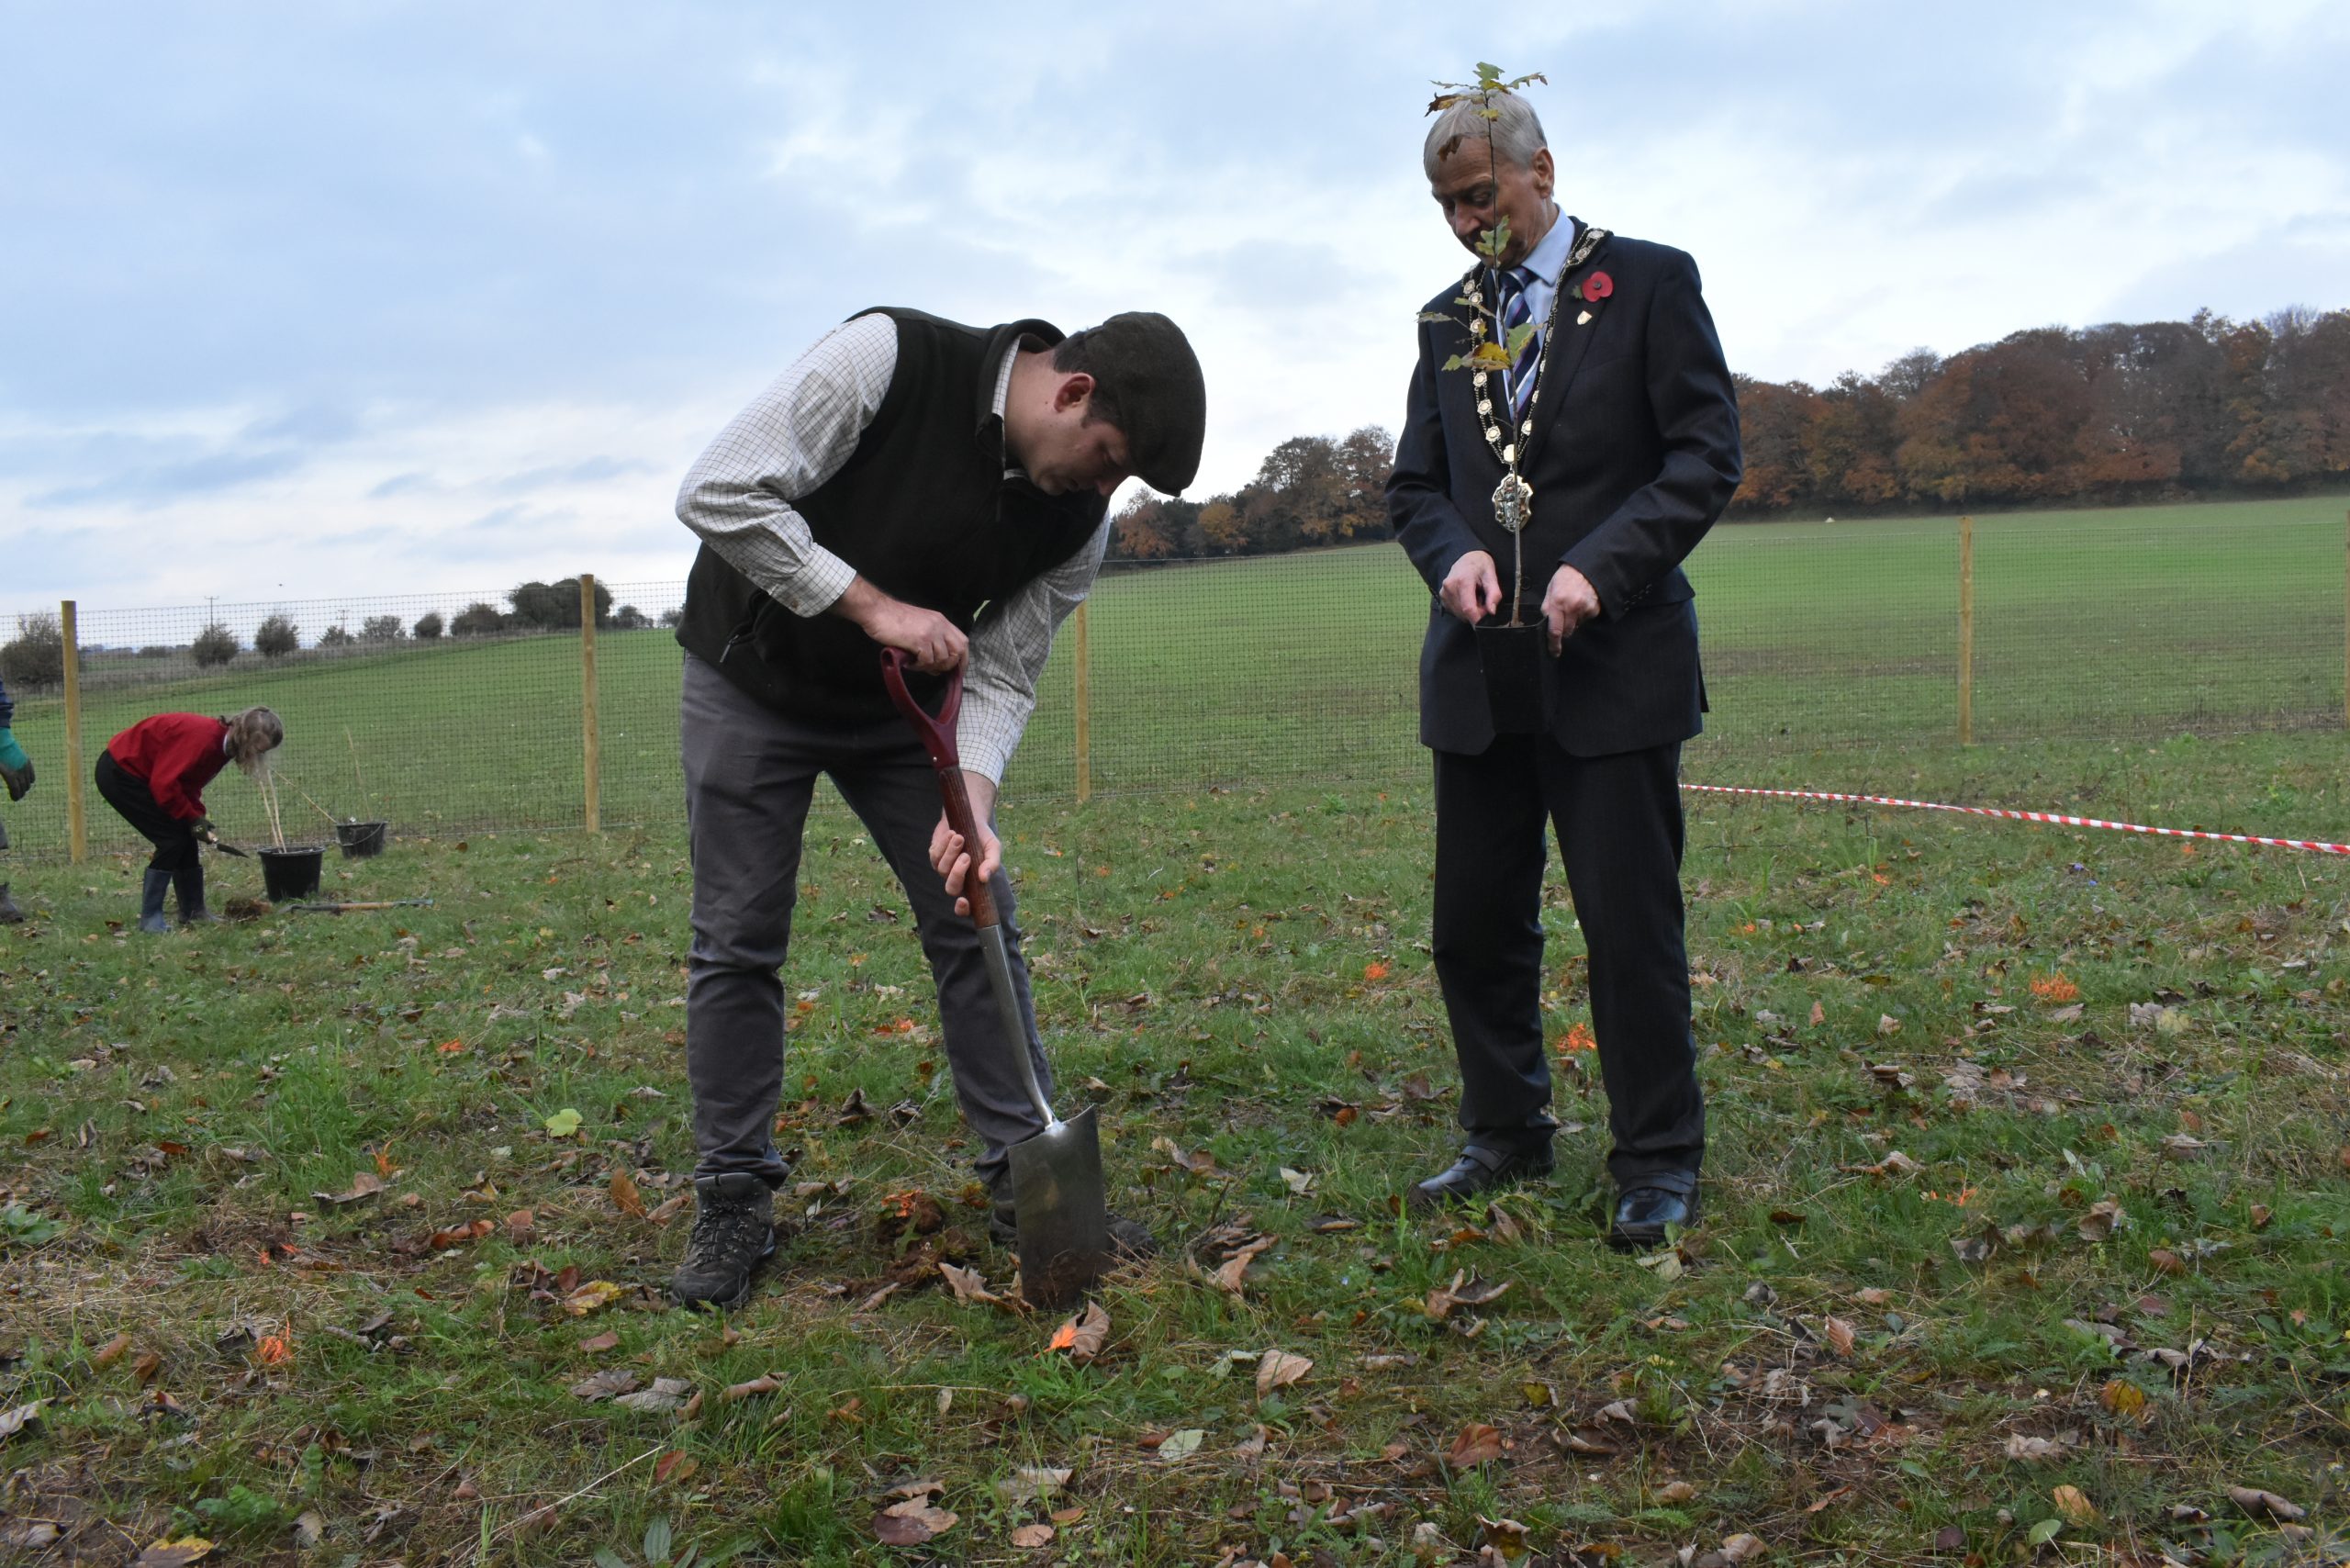 Cllr-Phil-North-and-Mayor-Cllr-Alan-Dowden-planting-a-tree-together